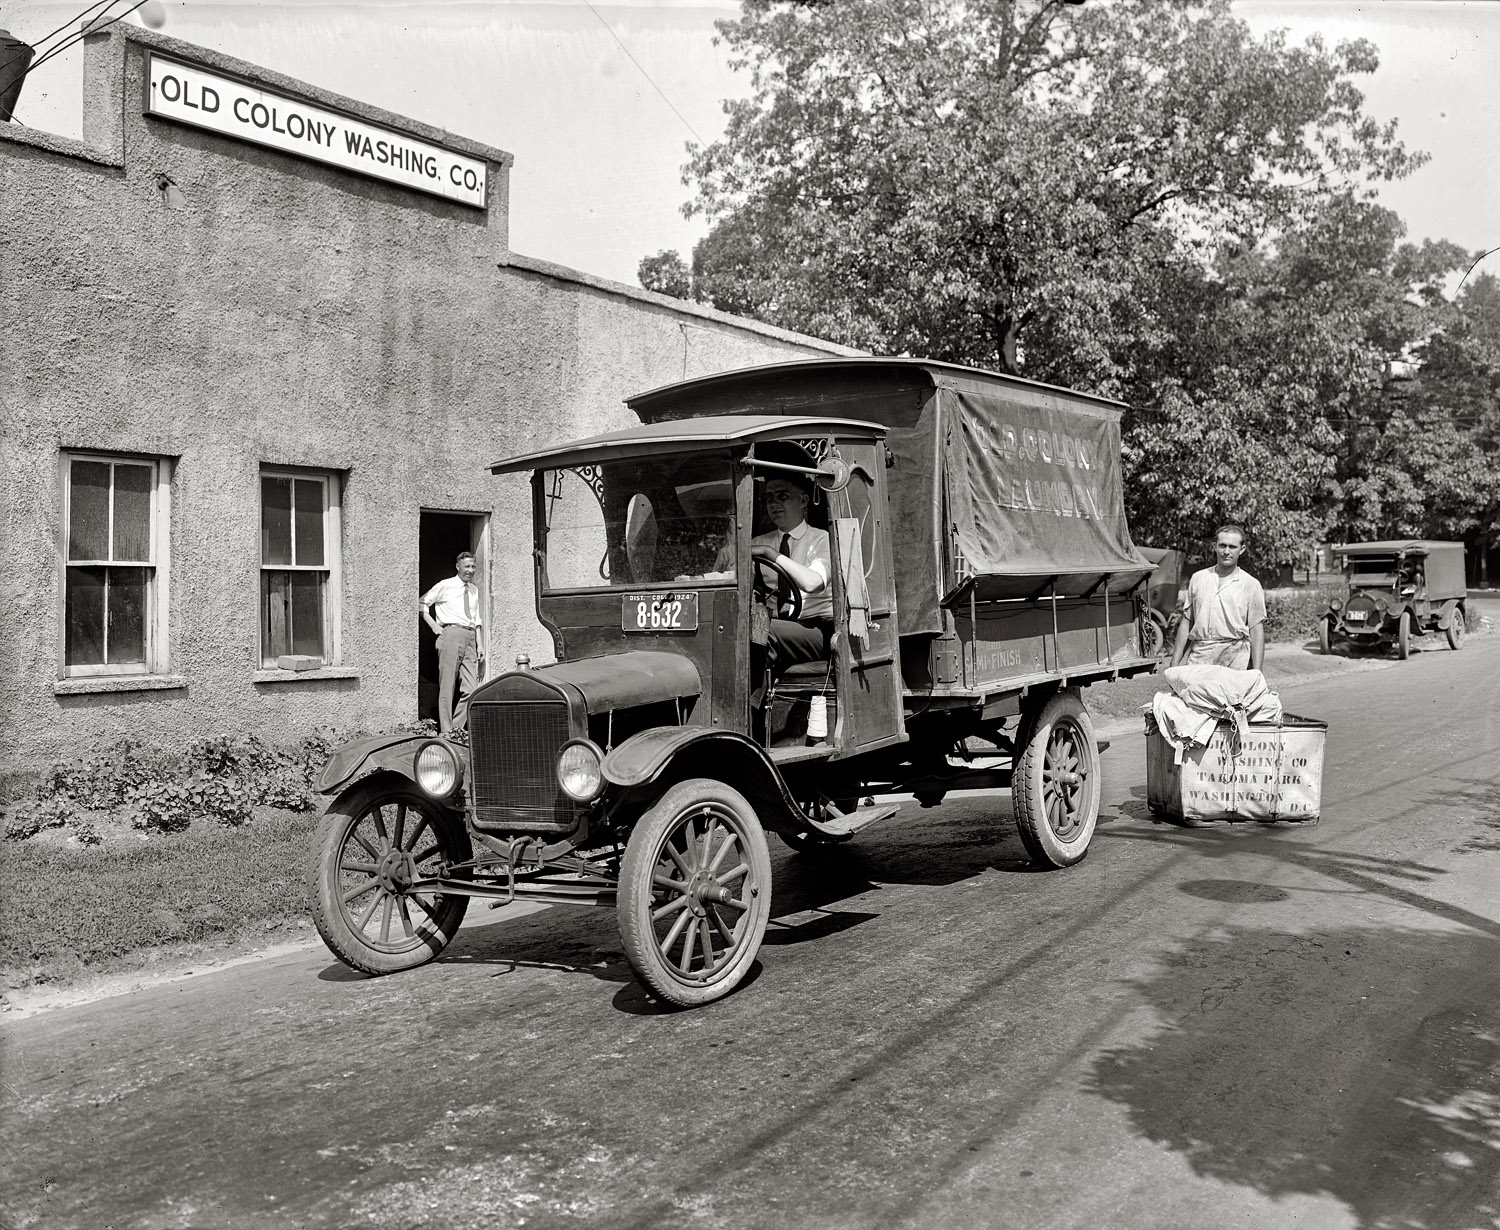 "Old Colony Laundry. Ford Motor Co." Washington, D.C., in 1924, when the streets were a honking sooty gridlock of trucks delivering diapers, blackberry pie and Whistle. Note the integrated, state-of-the-art turn signal attached to the cab. National Photo Company Collection glass negative. View full size.